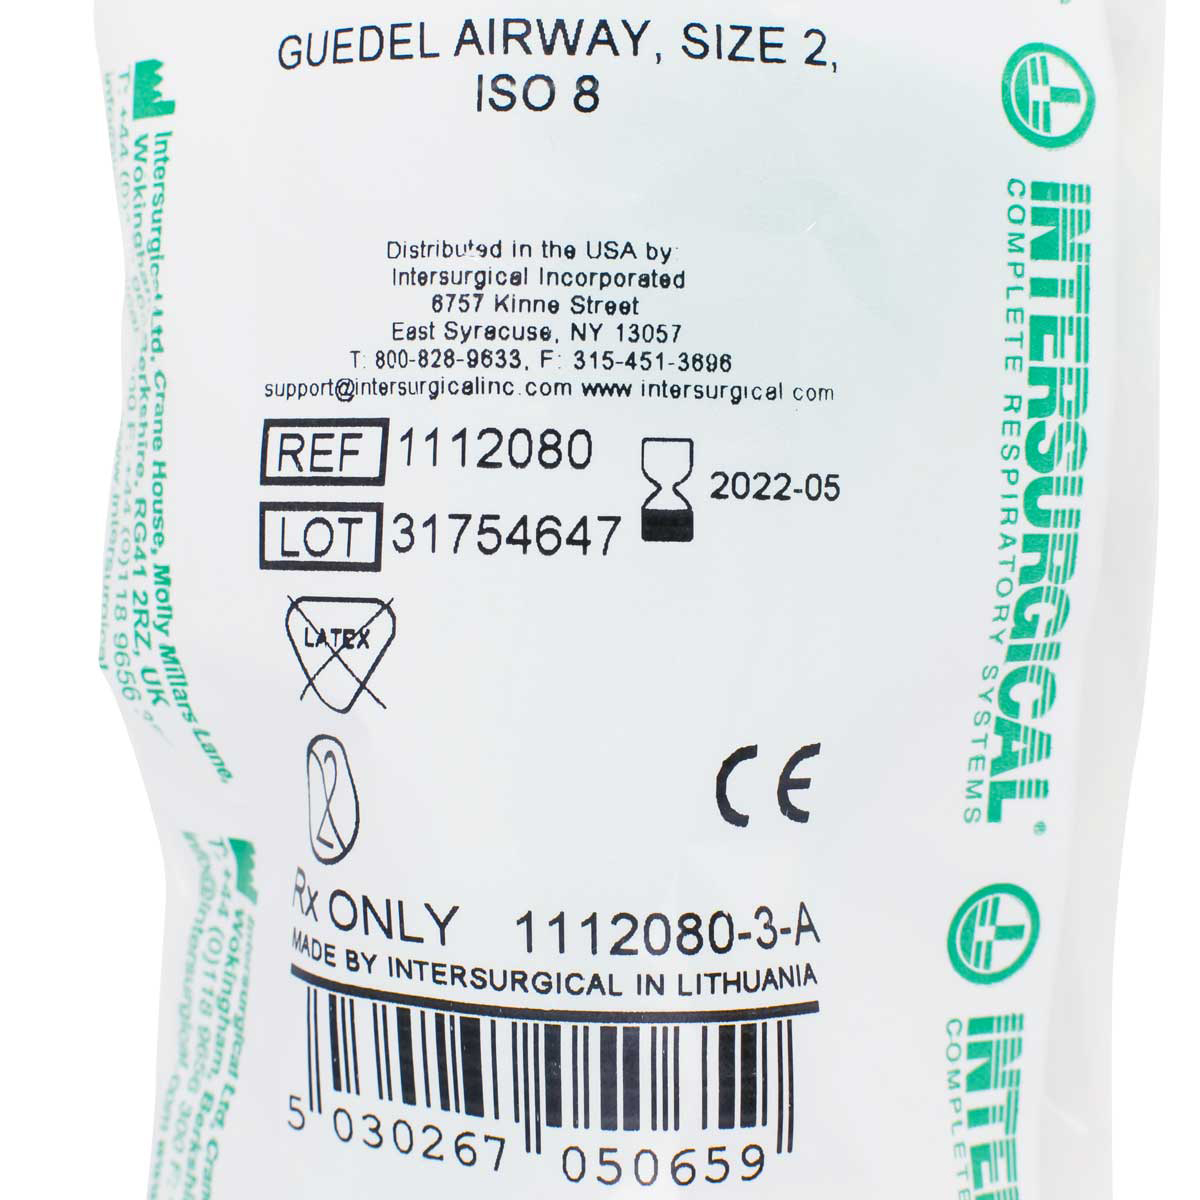 Small Adult Size 2 Guedel Airway packaging